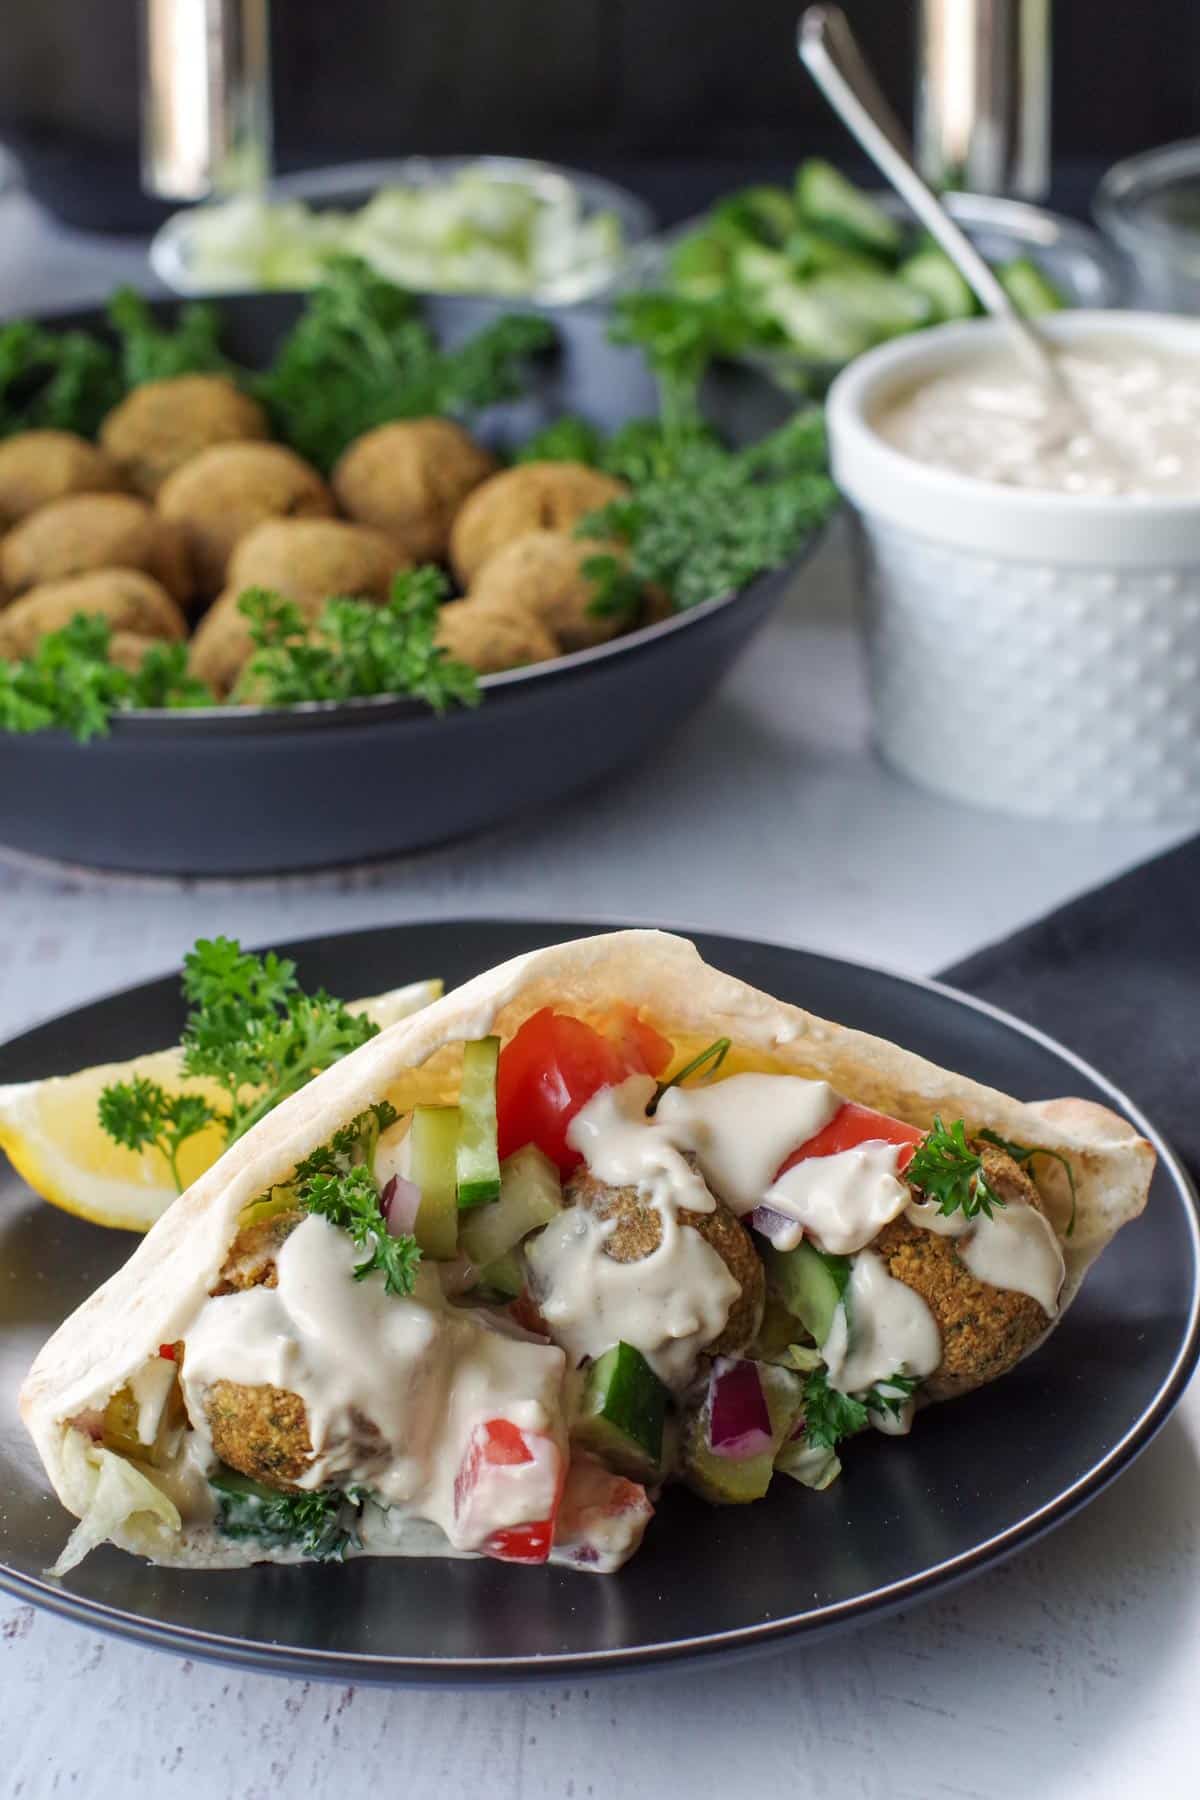 air fryer falafel in pita on black plate, with bowl of falafel balls and pita in the background